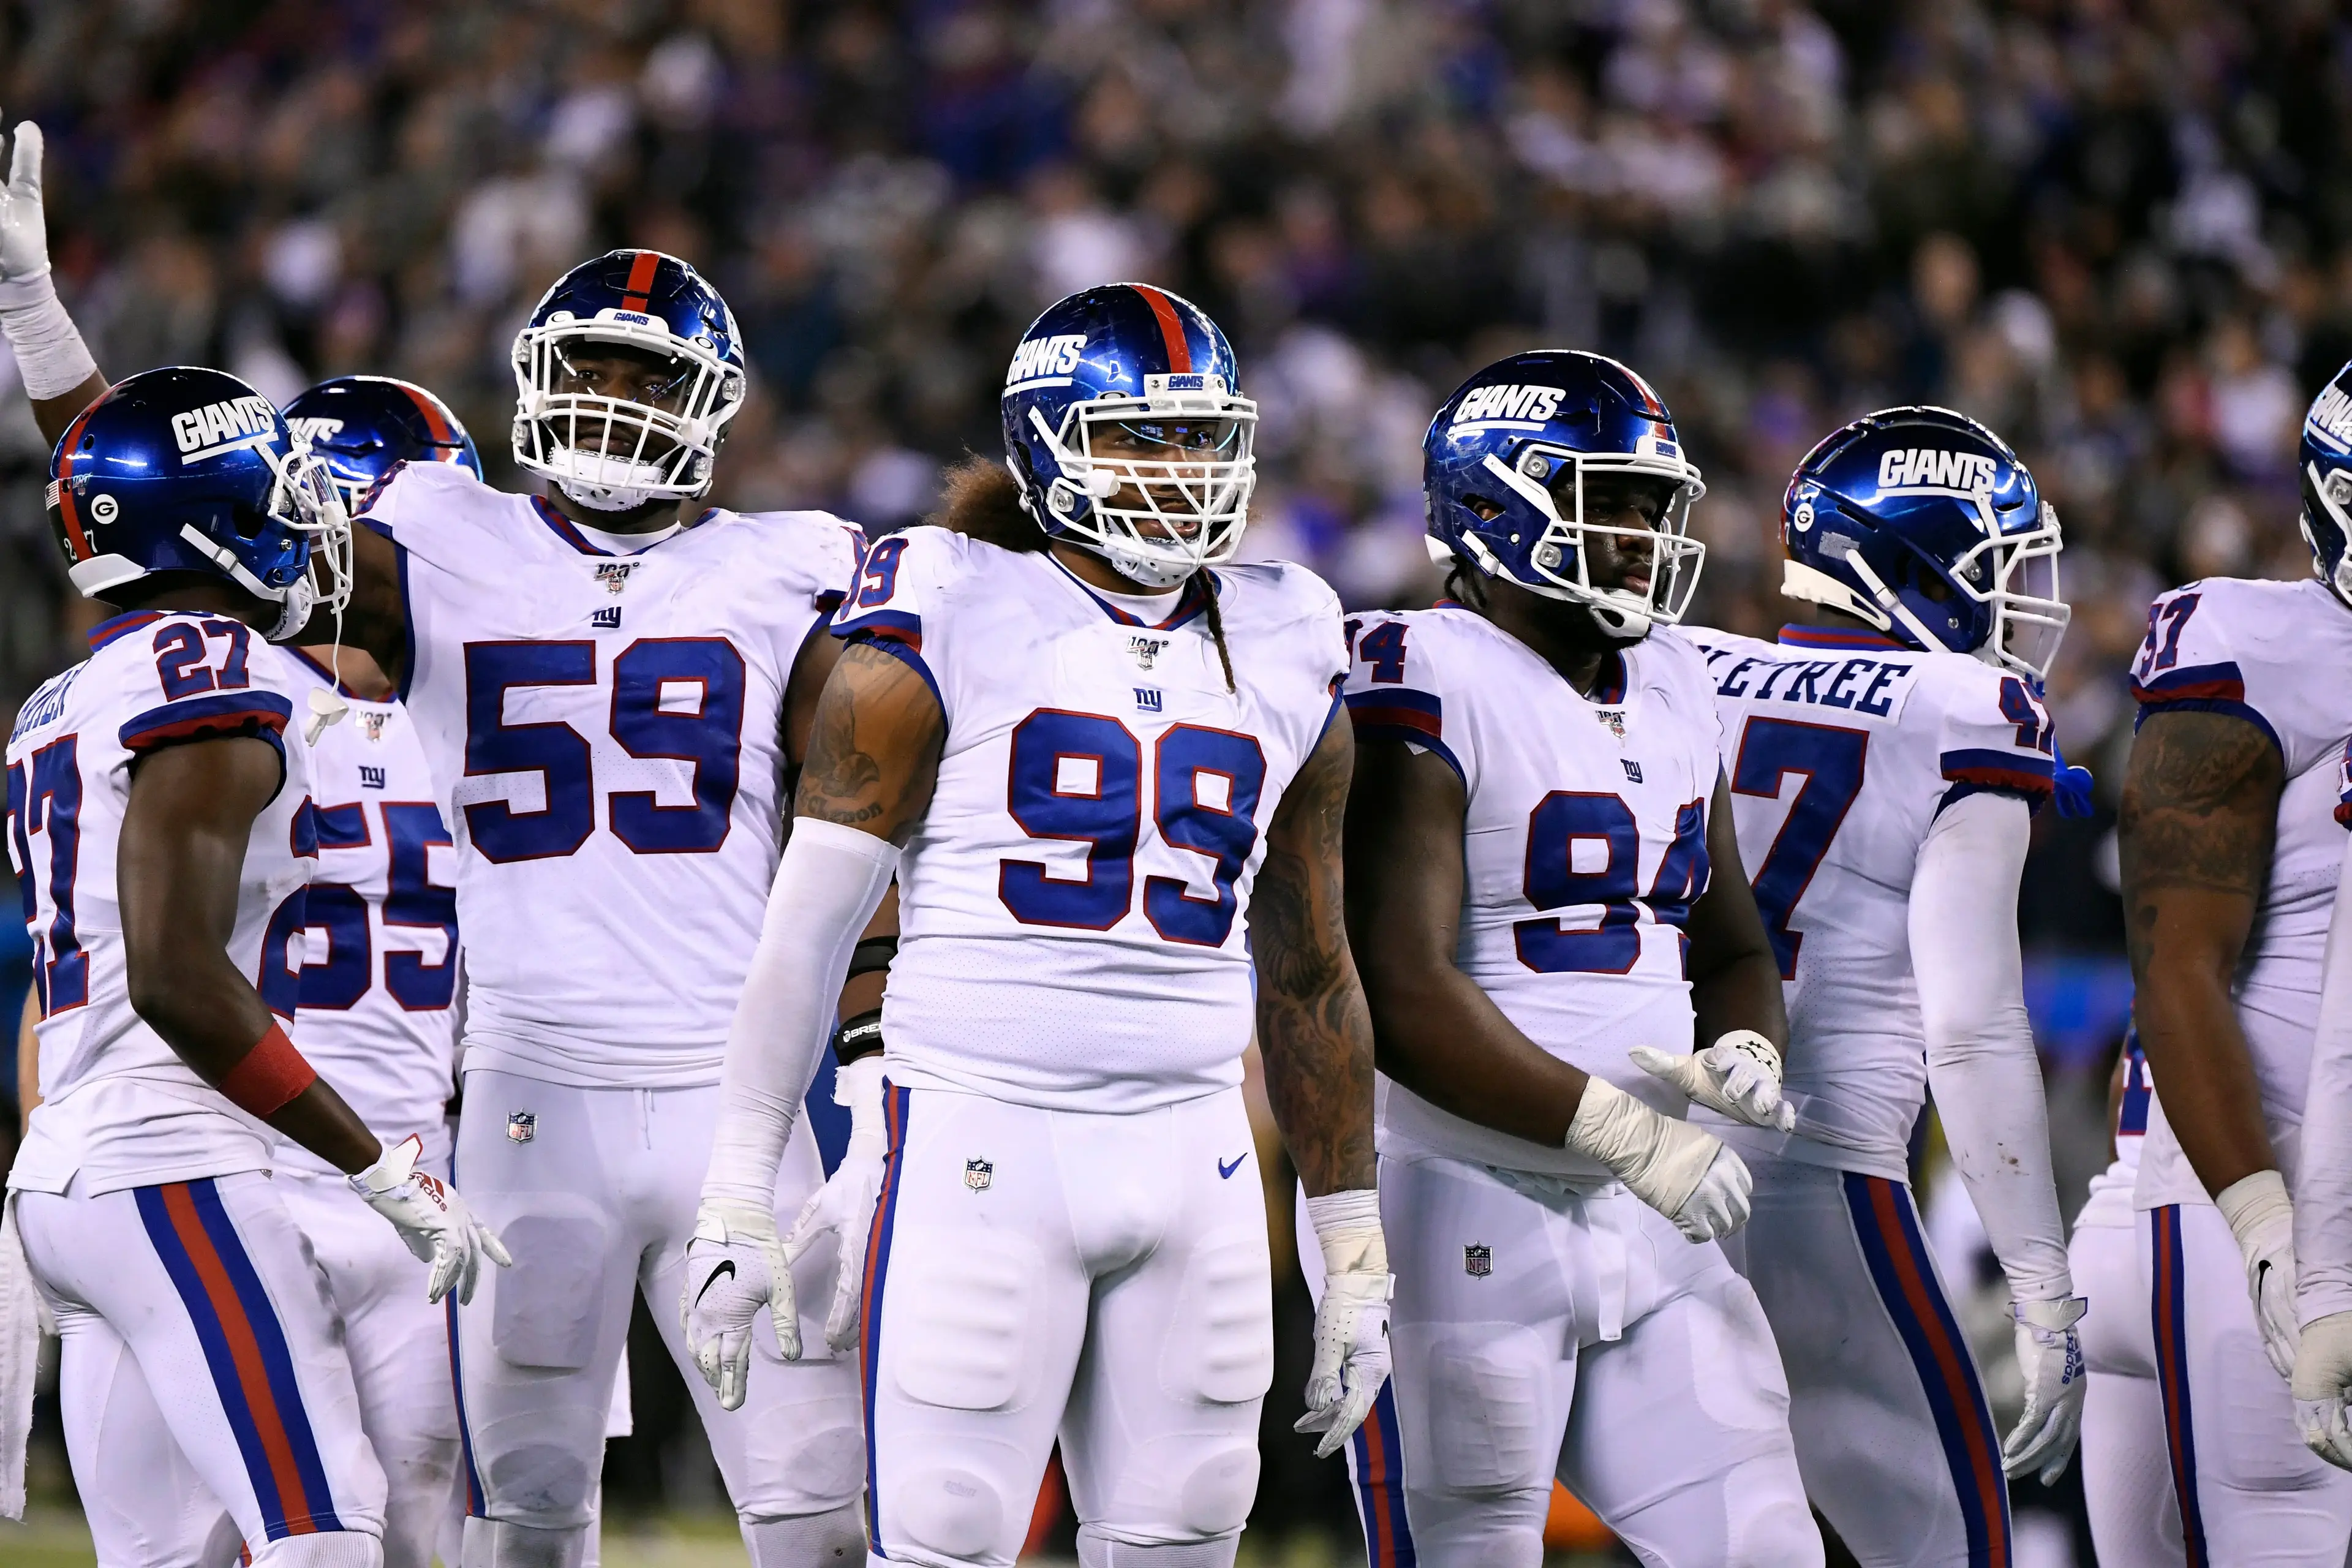 New York Giants lineman Leonard Williams (99) played his first game as a Giant after being traded by the New York Jets. The Dallas Cowboys defeat the New York Giants, 37-18, on Monday, Nov. 4, 2019, in East Rutherford. Nyg Vs Dal / © Danielle Parhizkaran/NorthJersey.com, North Jersey Record via Imagn Content Services, LLC